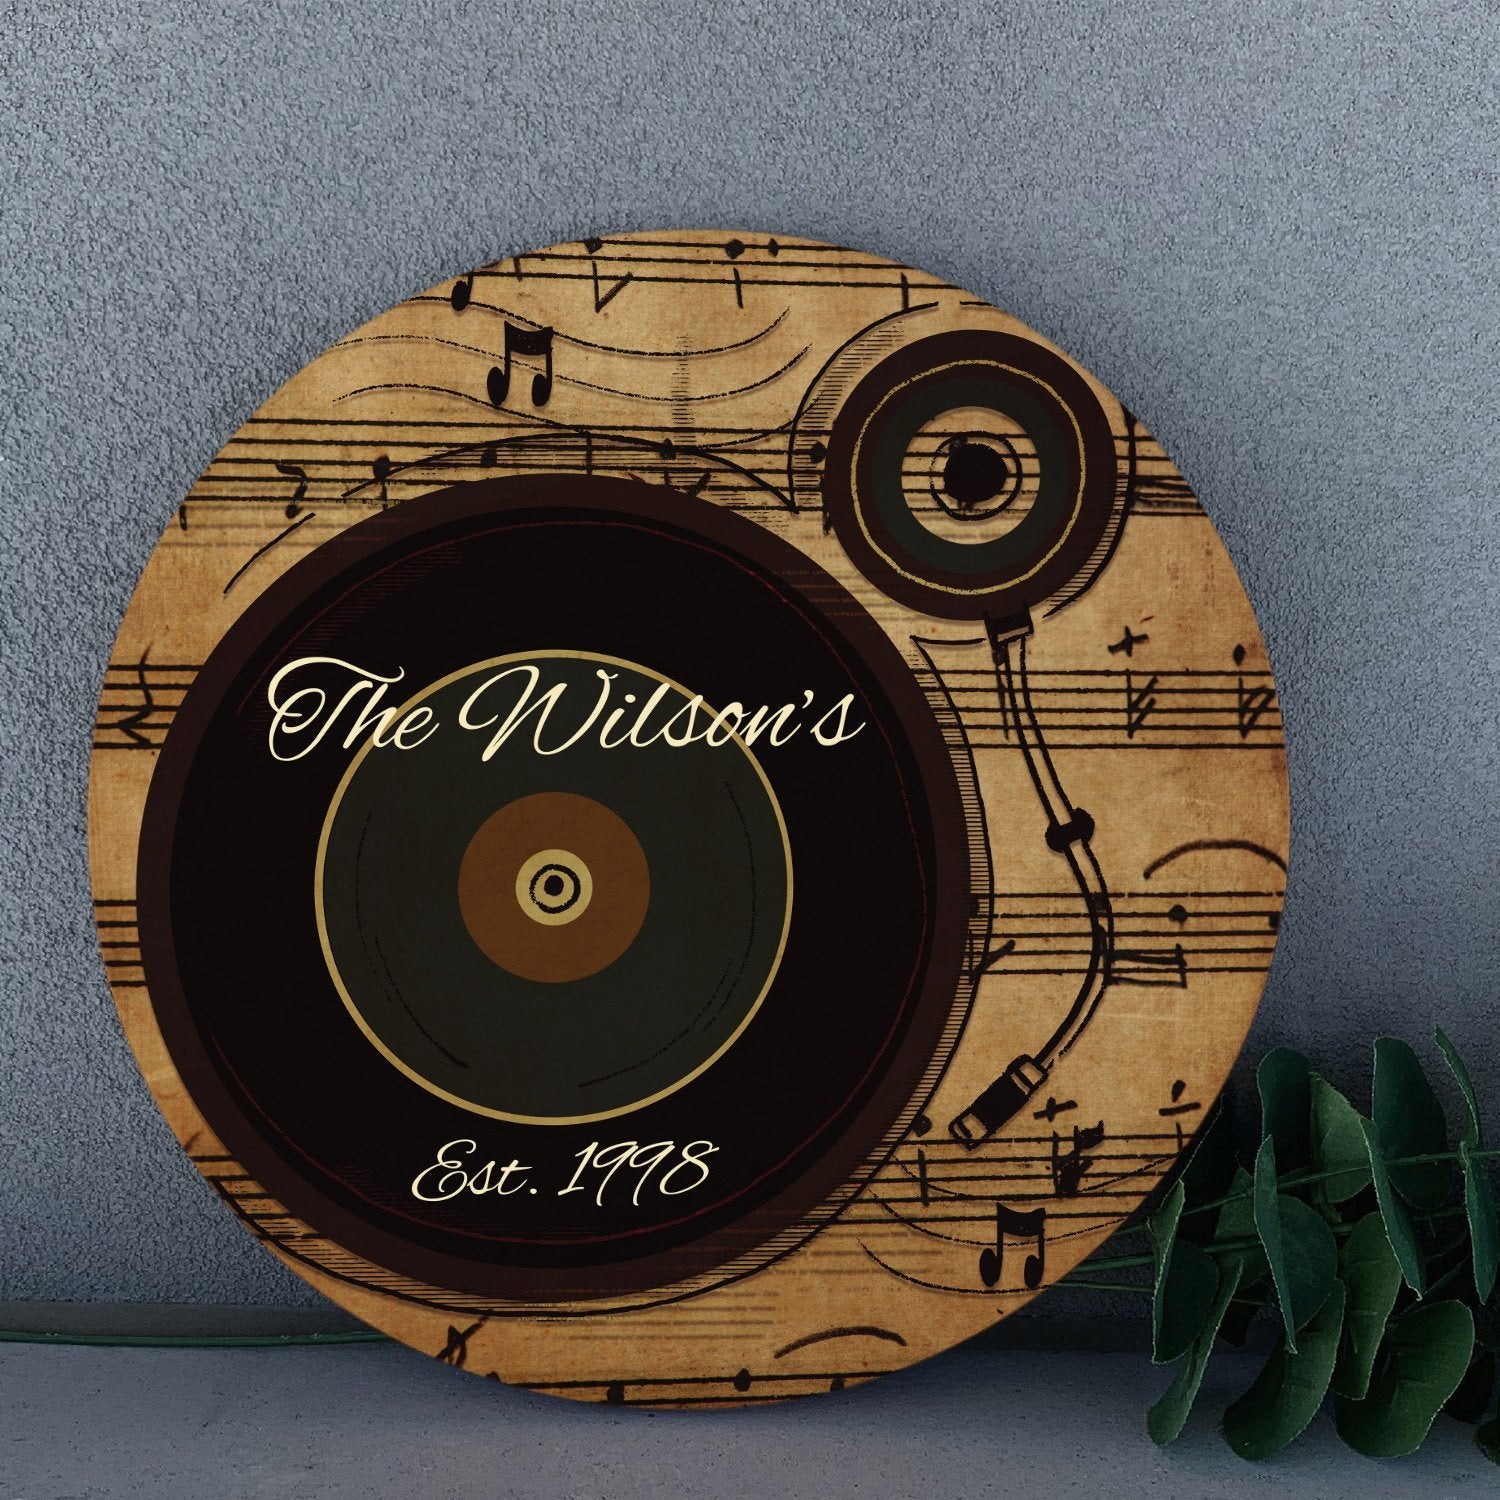 Custom Welcome Sign, Personalized Family Name And Text, Vinyl Record, Round Wood Sign